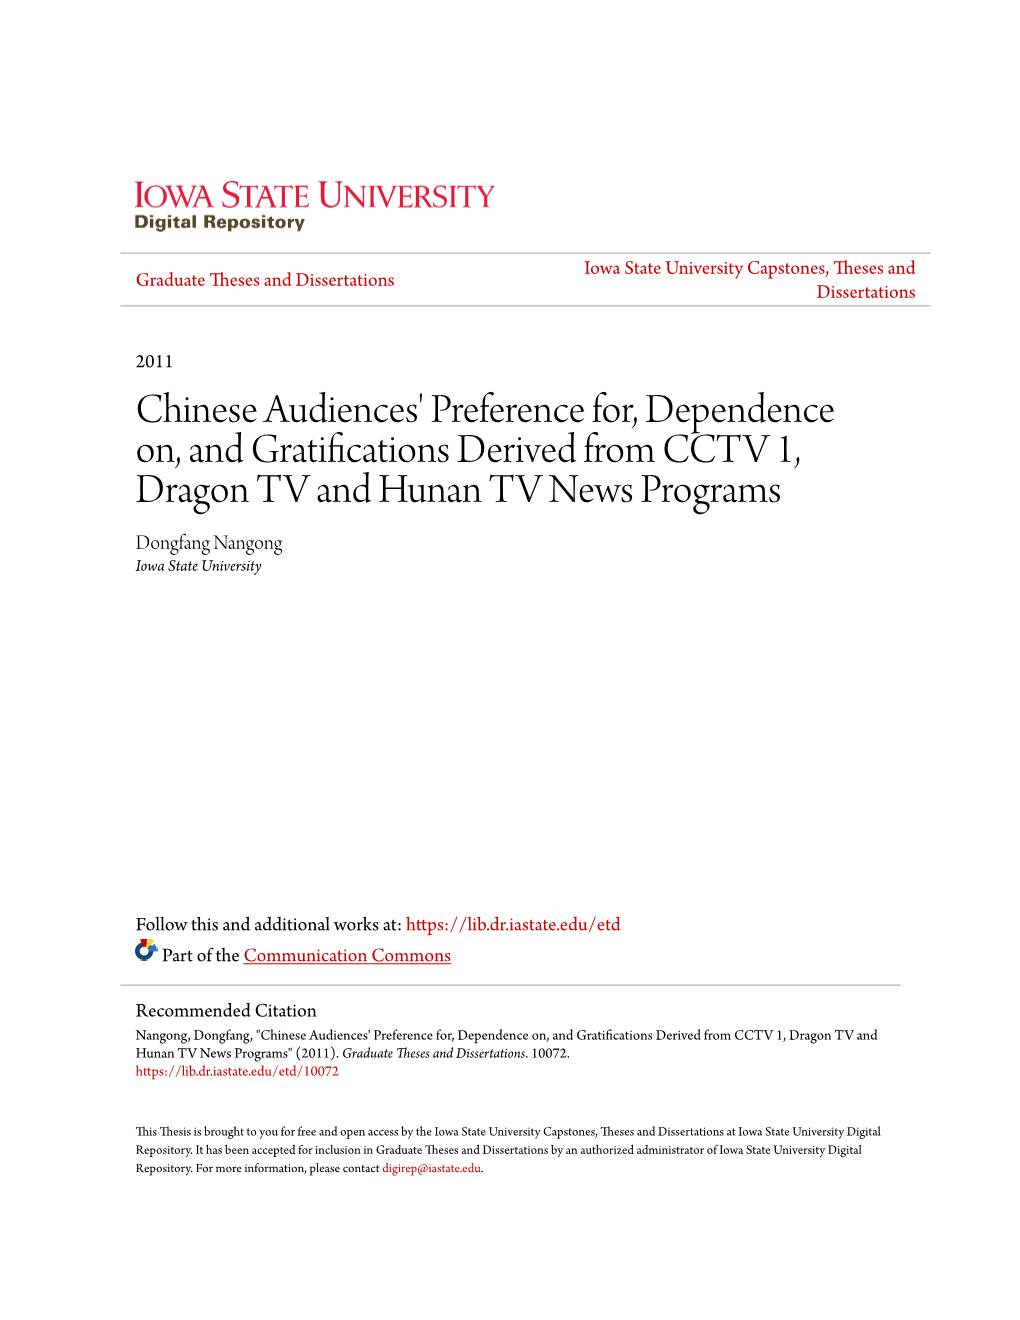 Chinese Audiences' Preference For, Dependence On, and Gratifications Derived from CCTV 1, Dragon TV and Hunan TV News Programs Dongfang Nangong Iowa State University